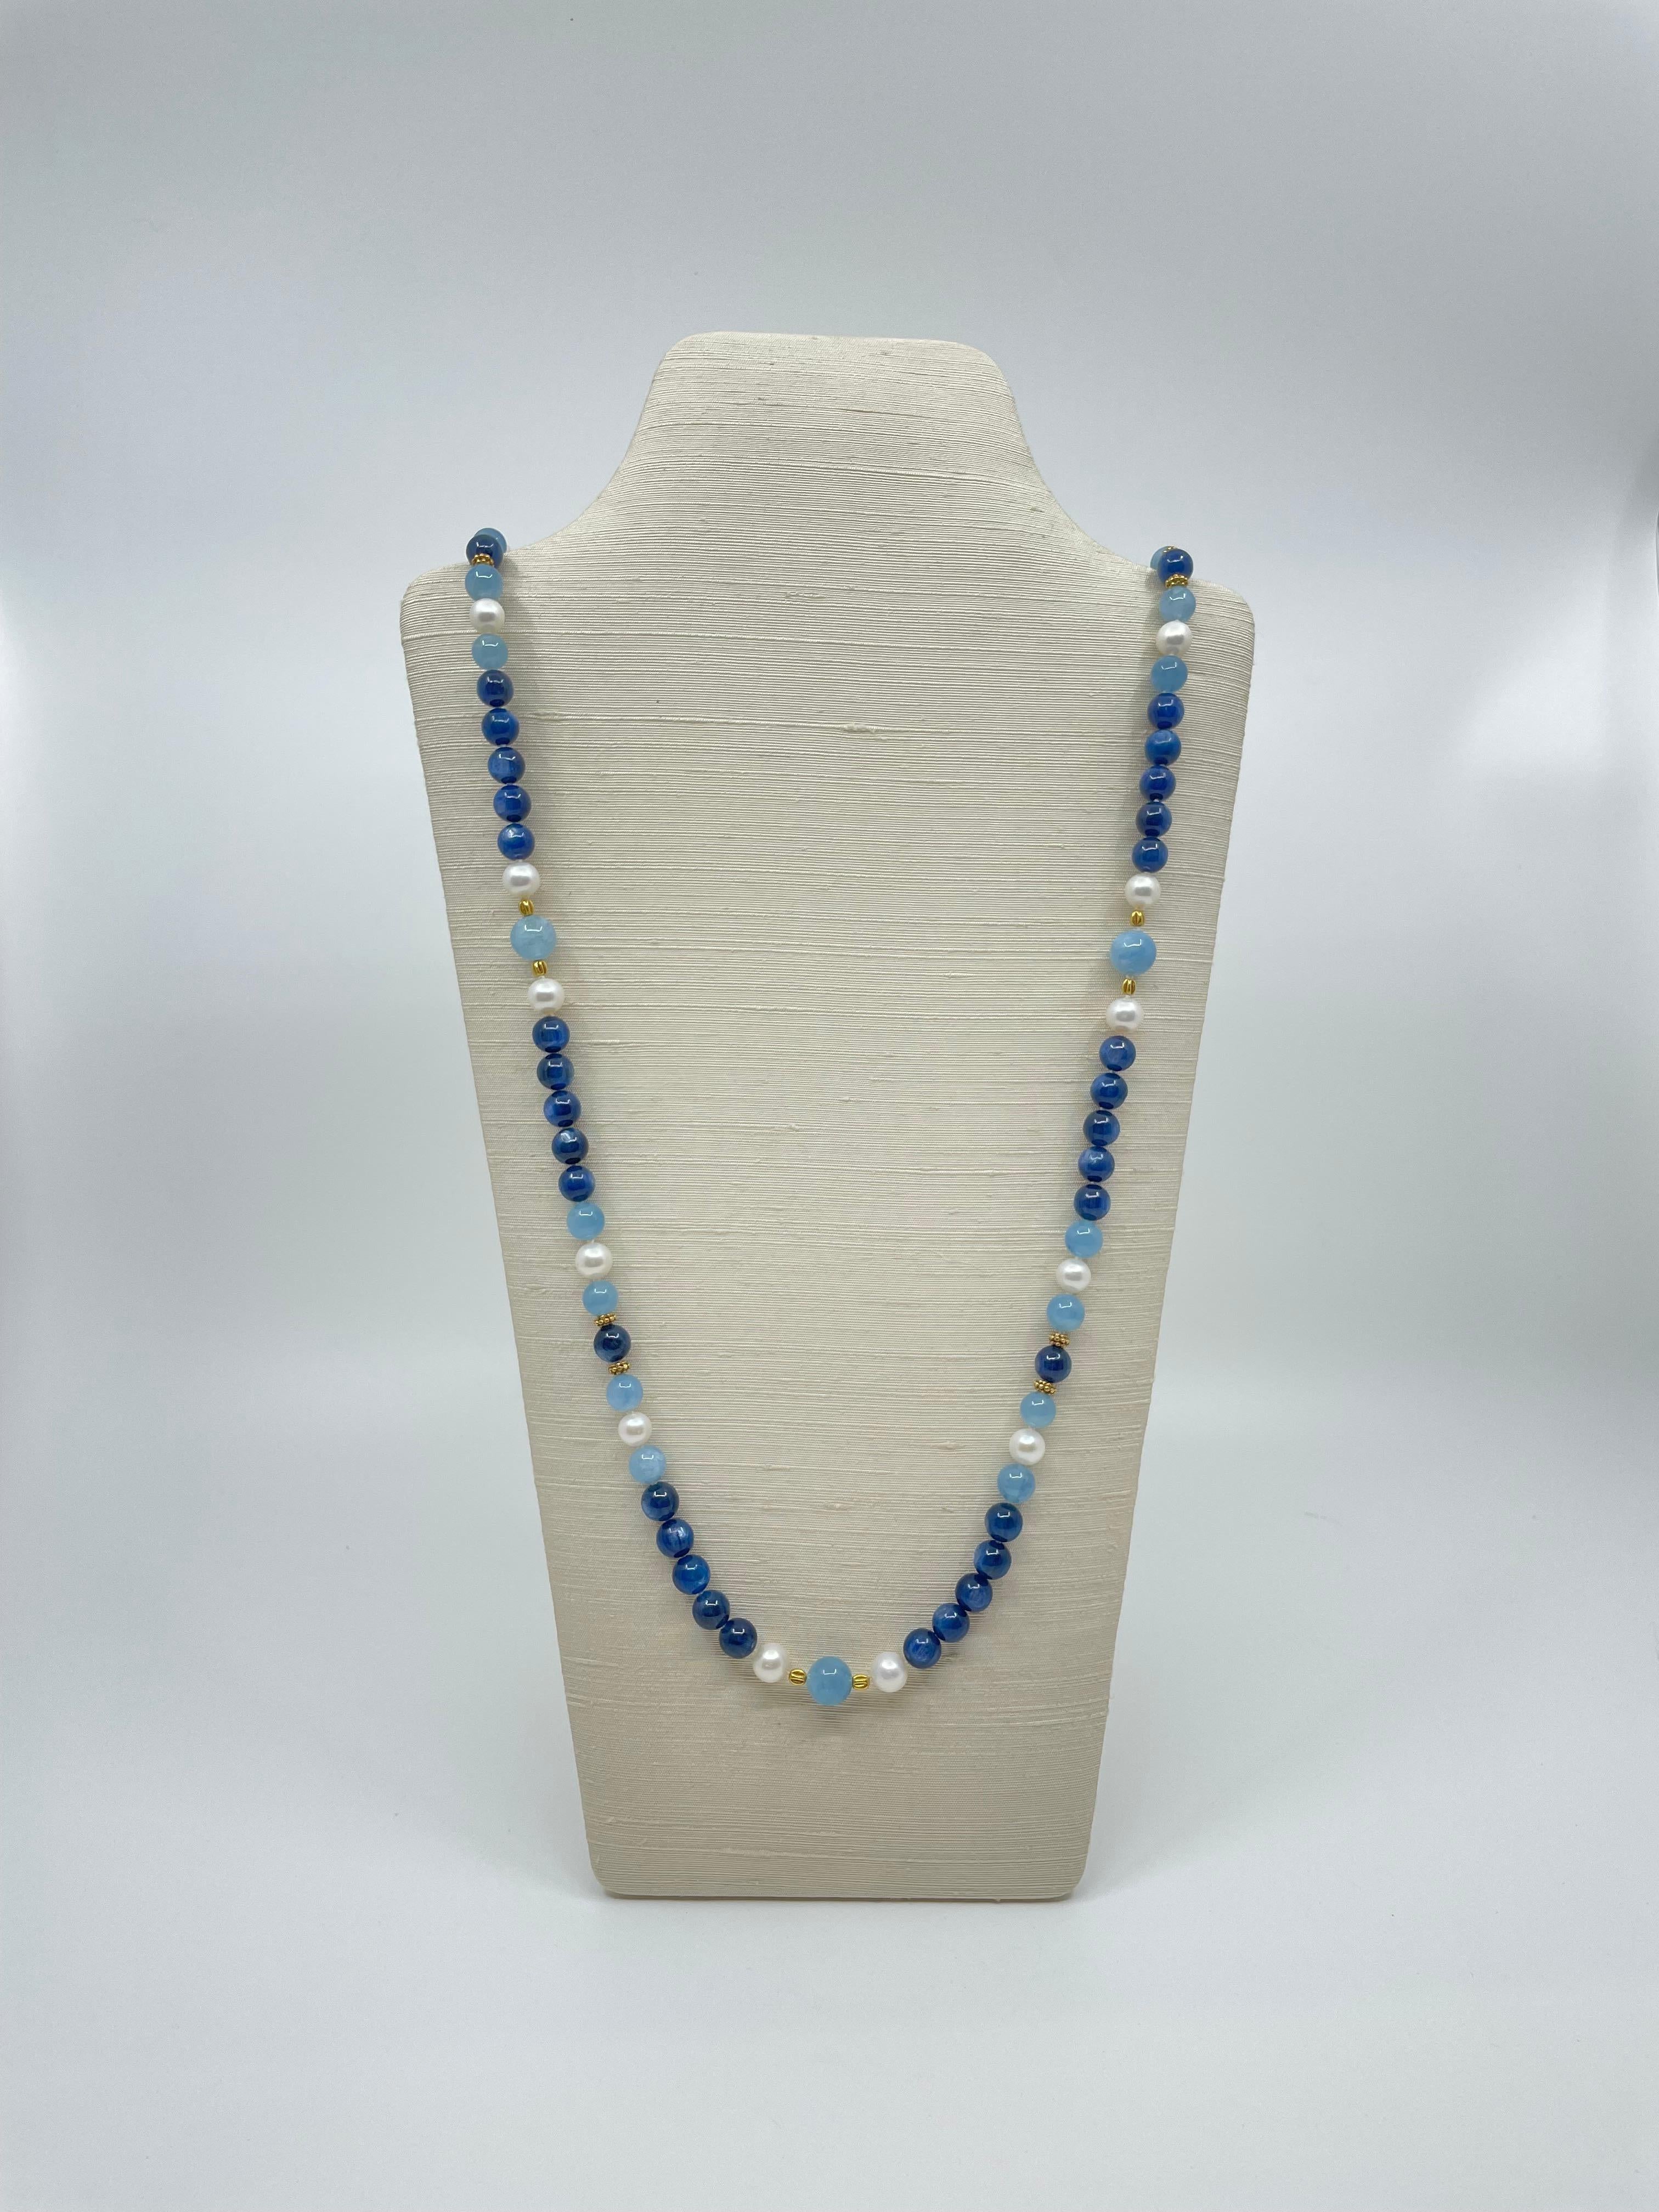 A hand-made long necklace of wonderful dark blue kyanite beads, round aquamarine beads, freshwater pearls, spaced by 18k gold beads, closes with an 18k gold toggle clasp. 
The lovely piece could be worn as a long necklace or double it to be a